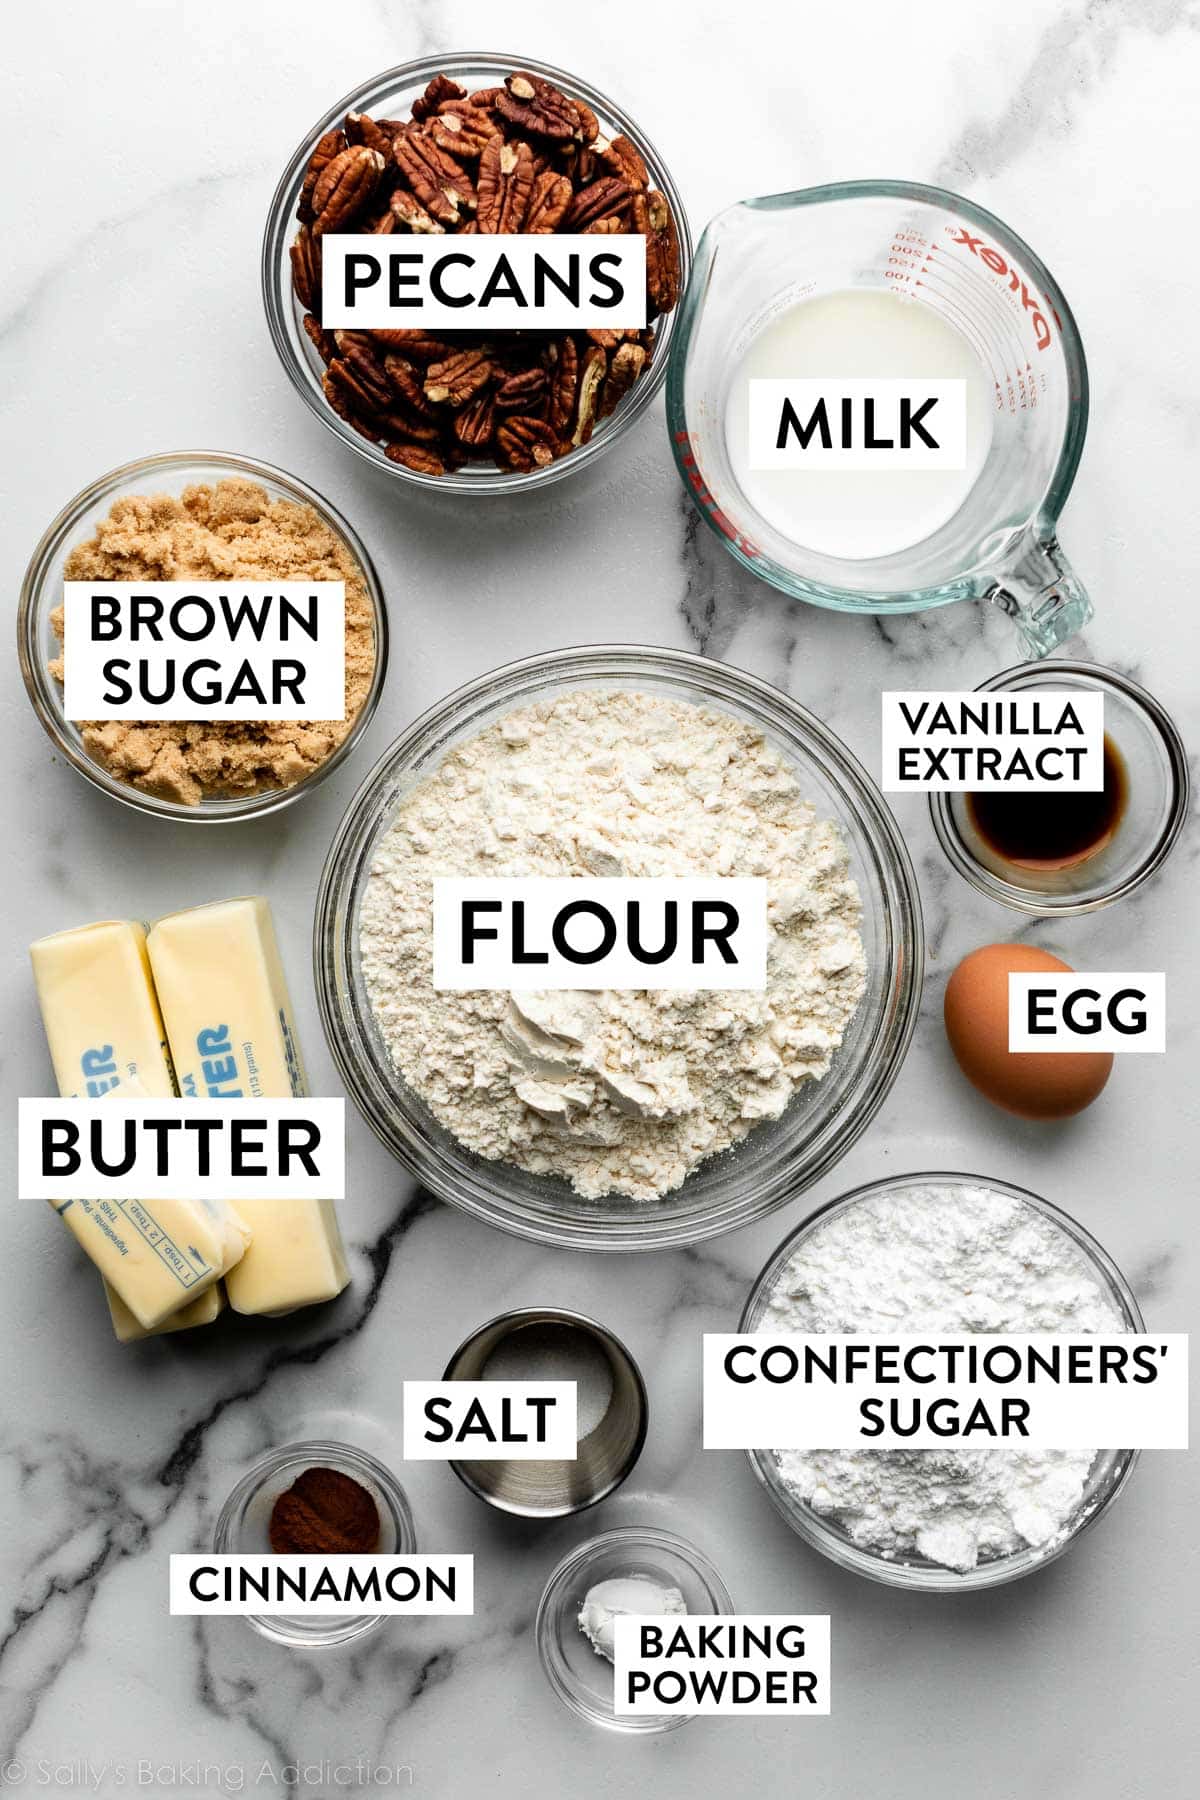 ingredients measured and displayed on marble counter including flour, milk, butter, egg, baking powder, cinnamon, pecans, and brown sugar.